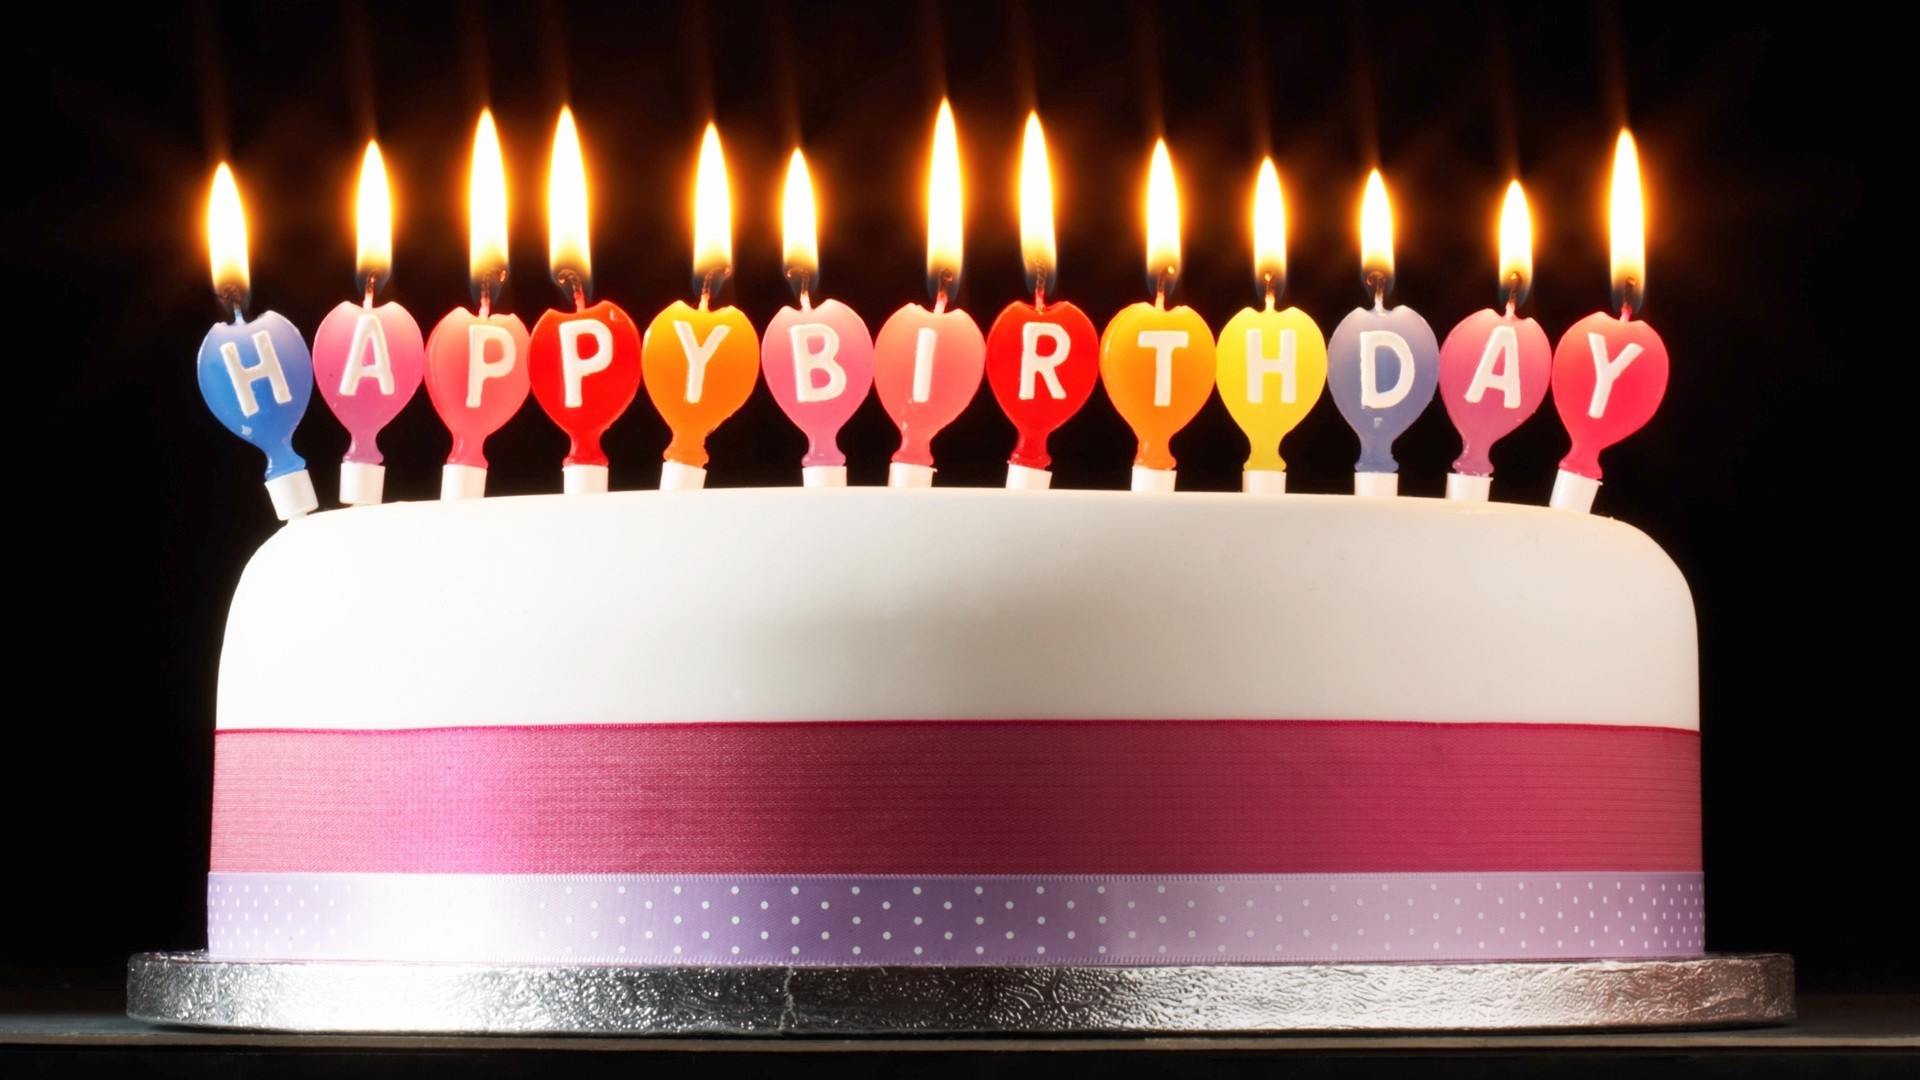 1920x1080 Happy Birthday cake, candles, fire, simple style Wallpaper Preview